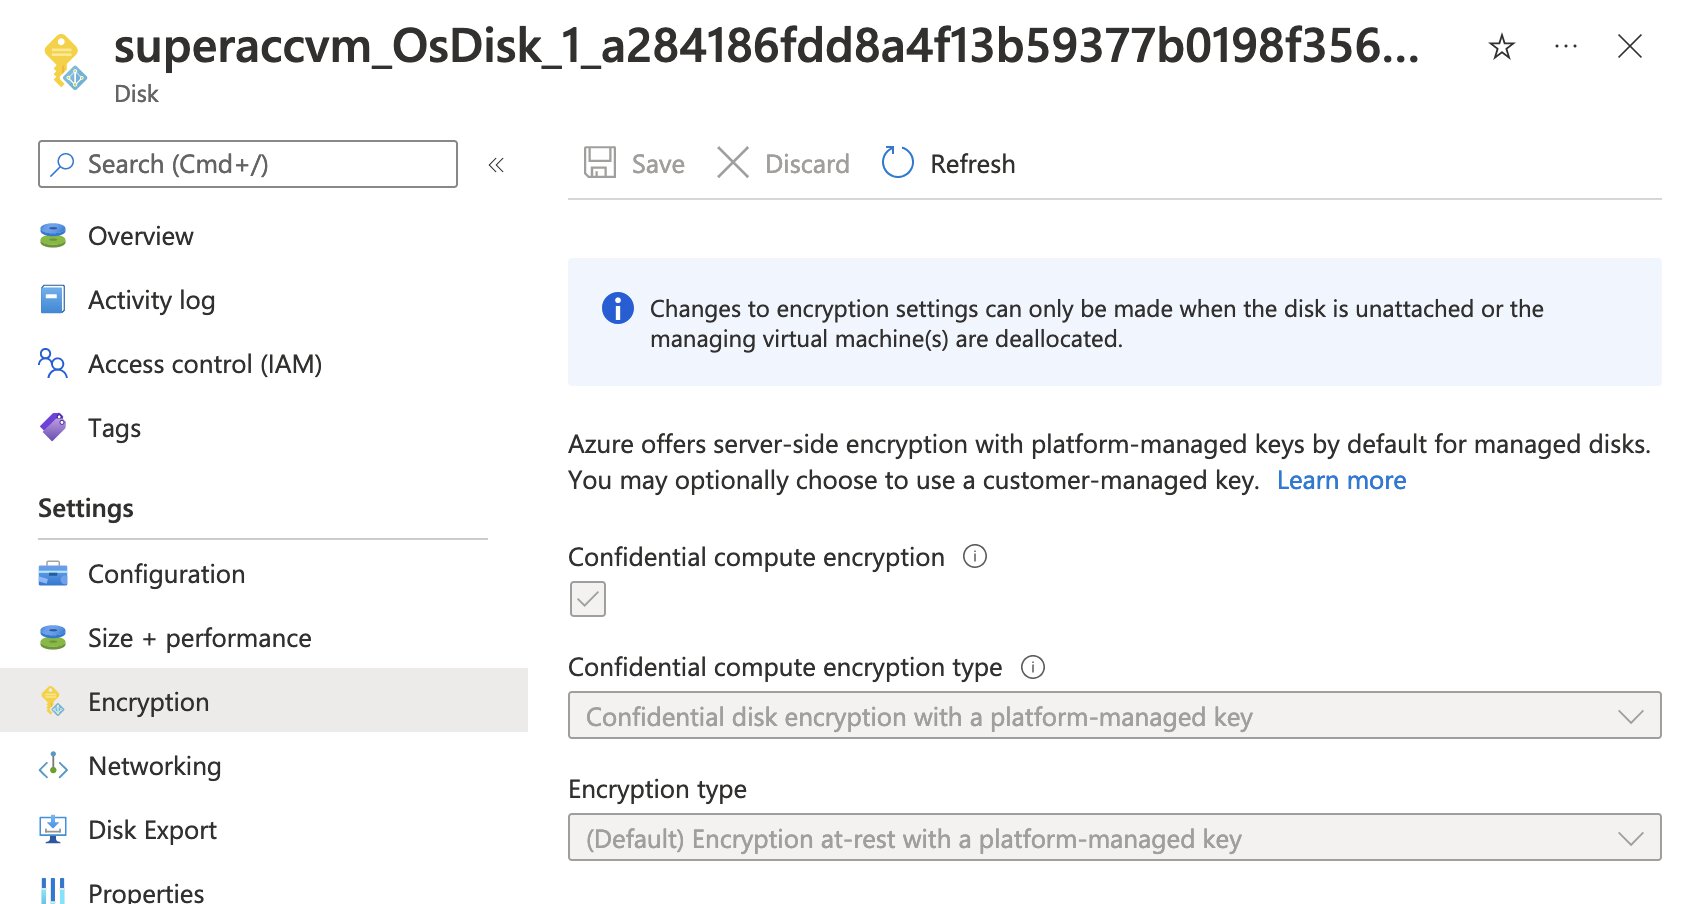 A screenshot of the disk’s blade, OS disk encryption. “Confidential compute encryption” has been enabled.” Confidential compute encryption type” has been set to “confidential disk encryption with a platform-managed key”. The “Encryption type”, used for encryption at rest, is set to use a platform-managed key which is also the default.